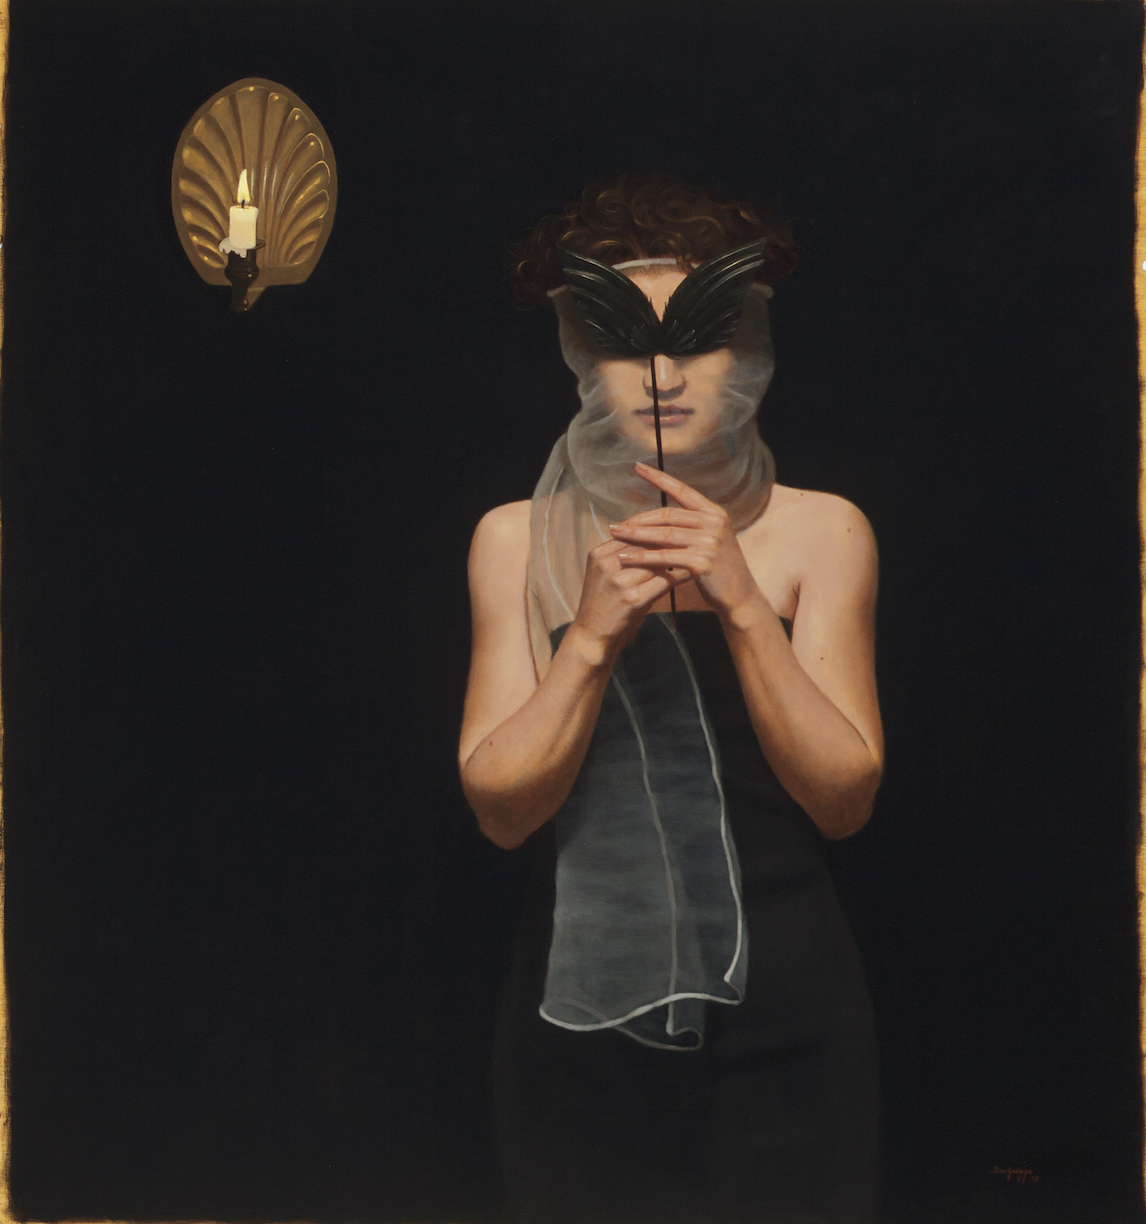 Dan Griggs: Young Woman with Crow's Wing Mask